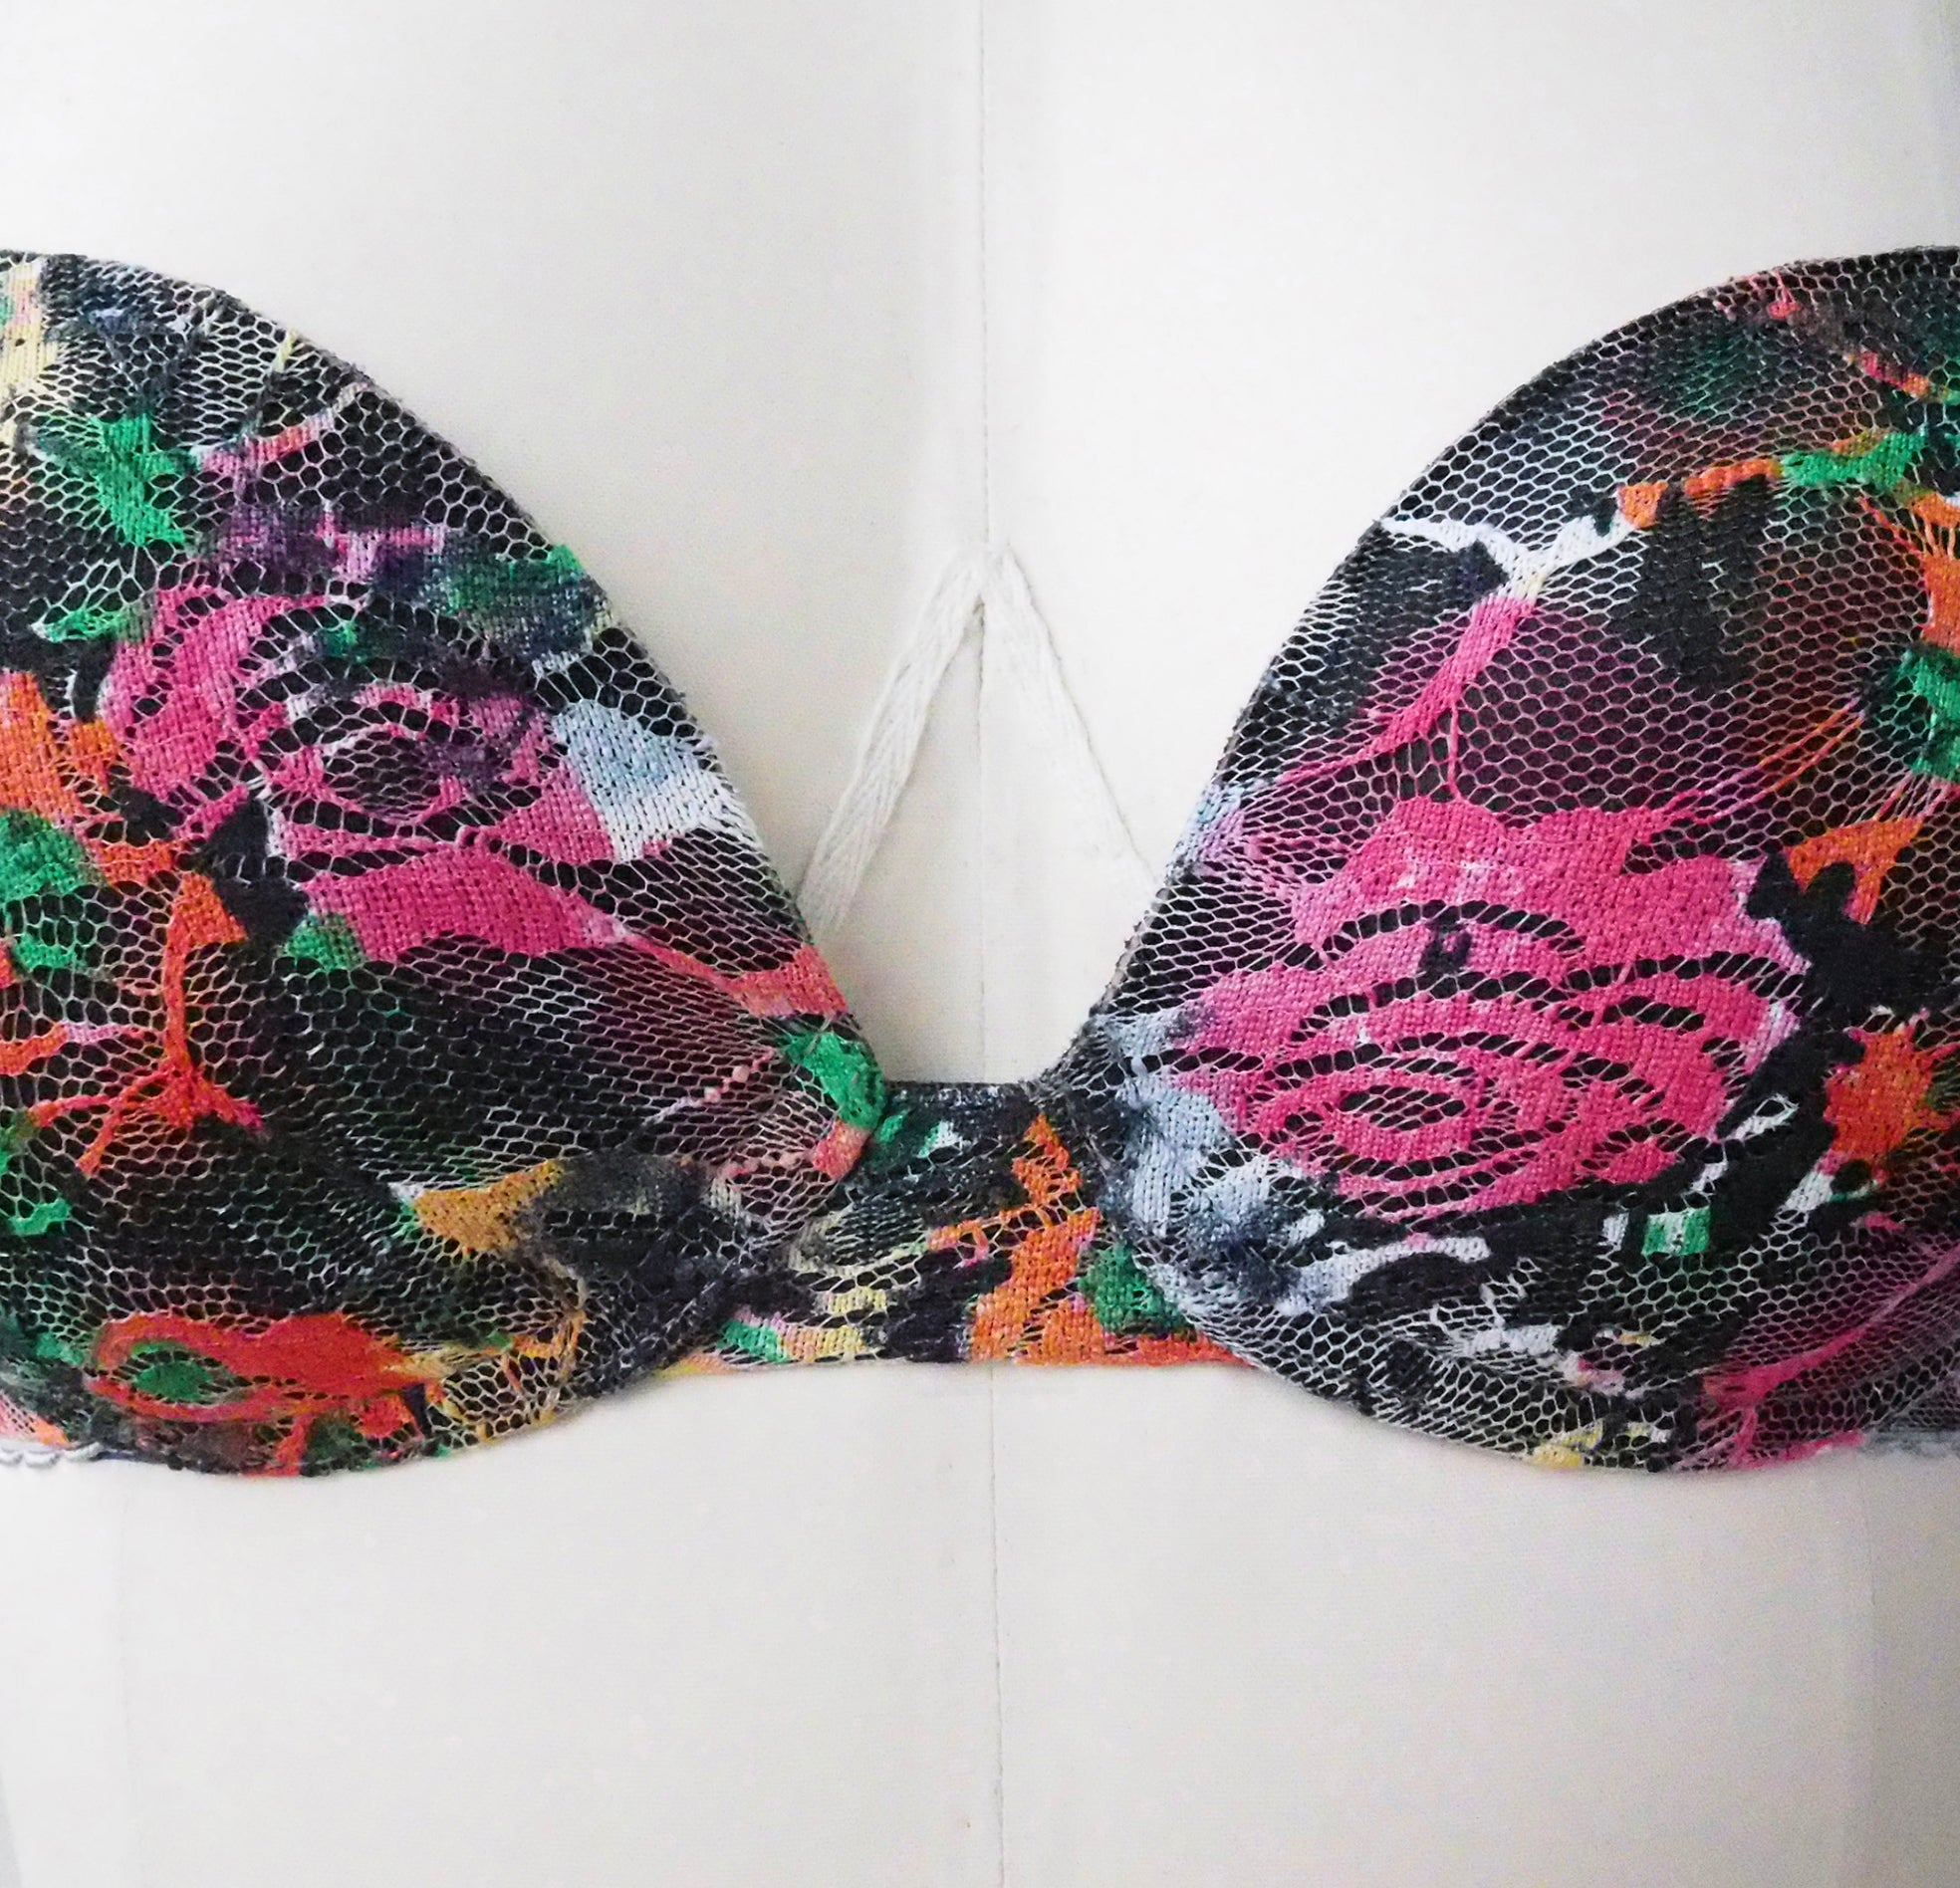 Four commercial bras and seamless bras' knitting structures; (a) sample